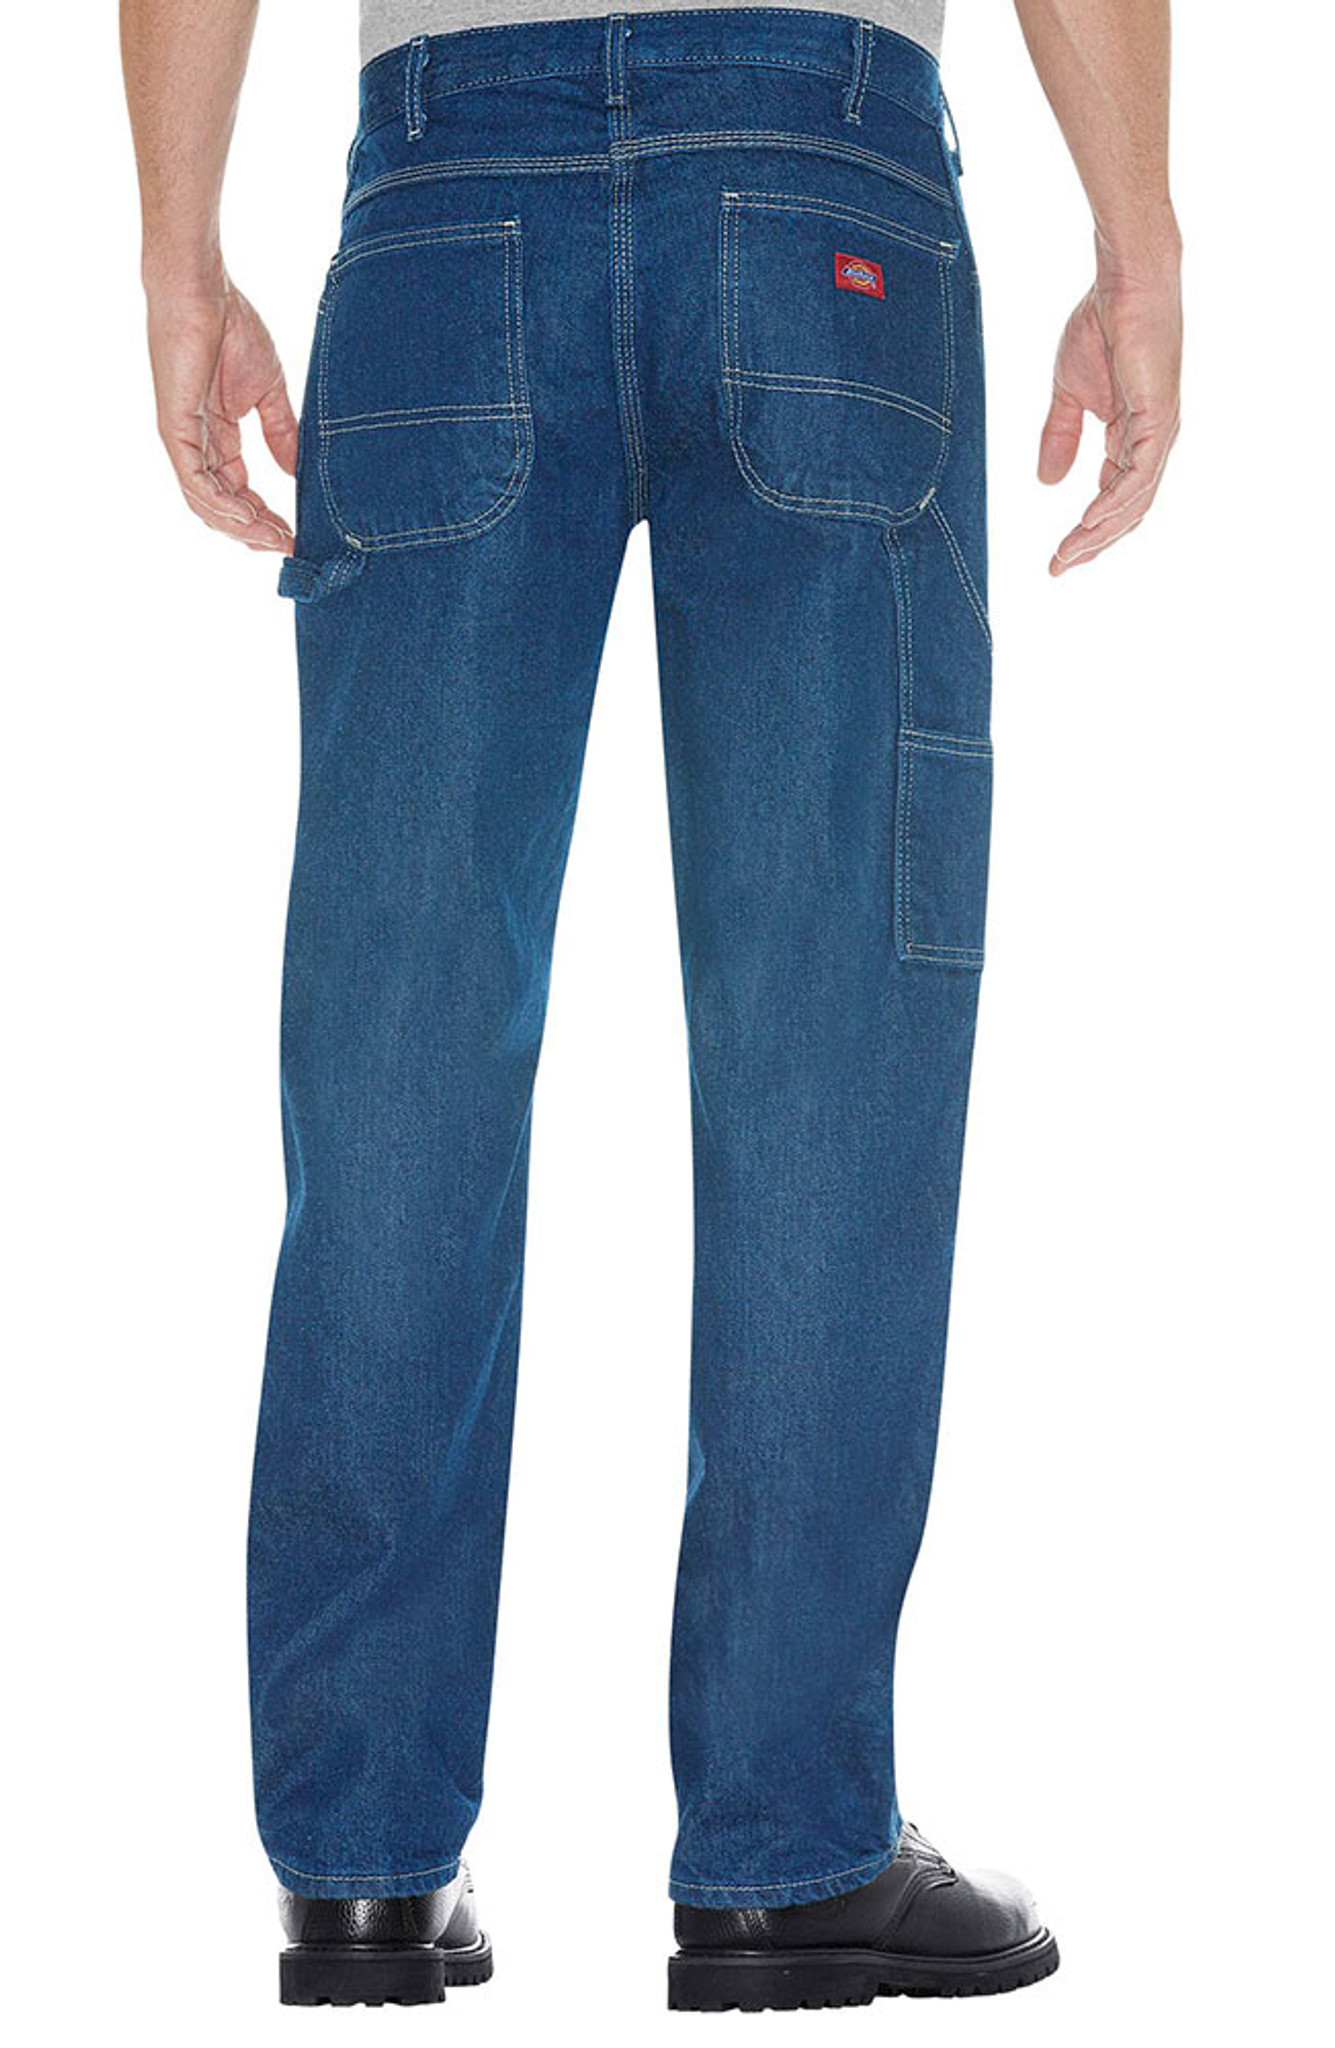 Dickies Men's Low Rise Relaxed Fit Straight Leg Carpenter Jeans - Stonewashed Indigo Blue